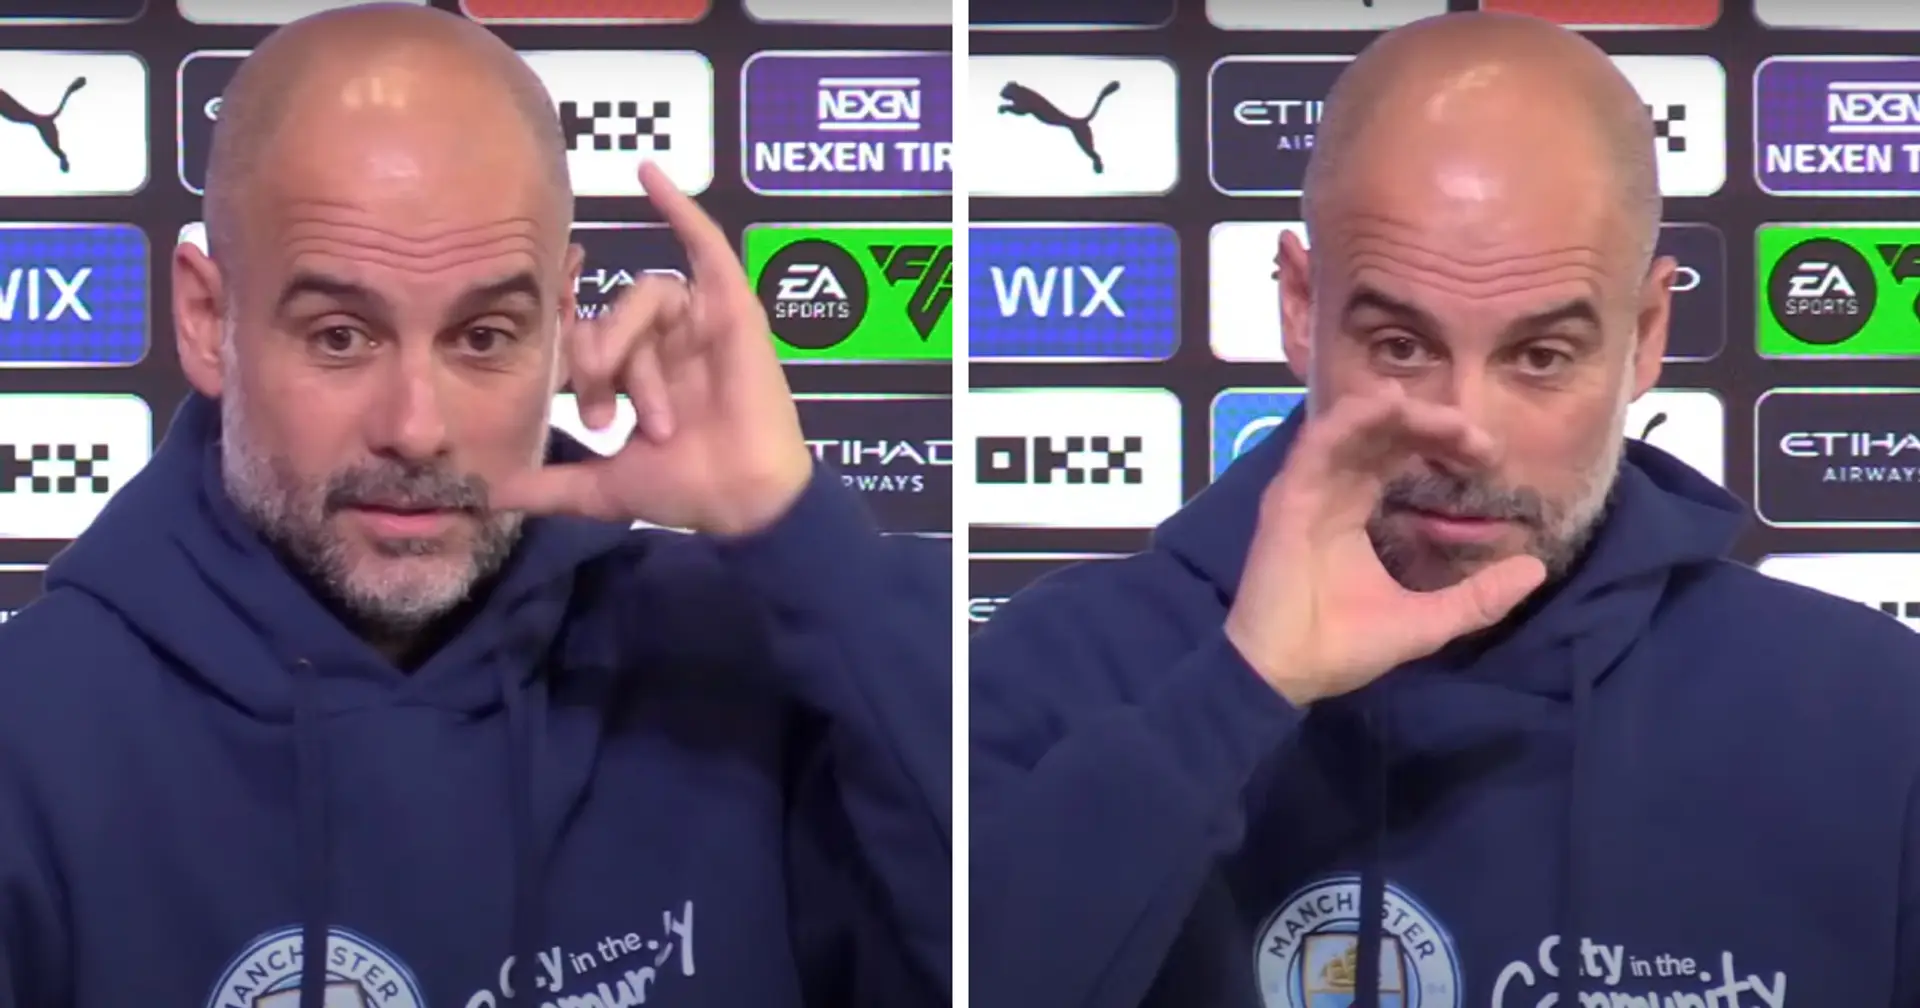 'Talking of beers': Pep Guardiola shares his thoughts on Jack Grealish form after funny exchange with journalist